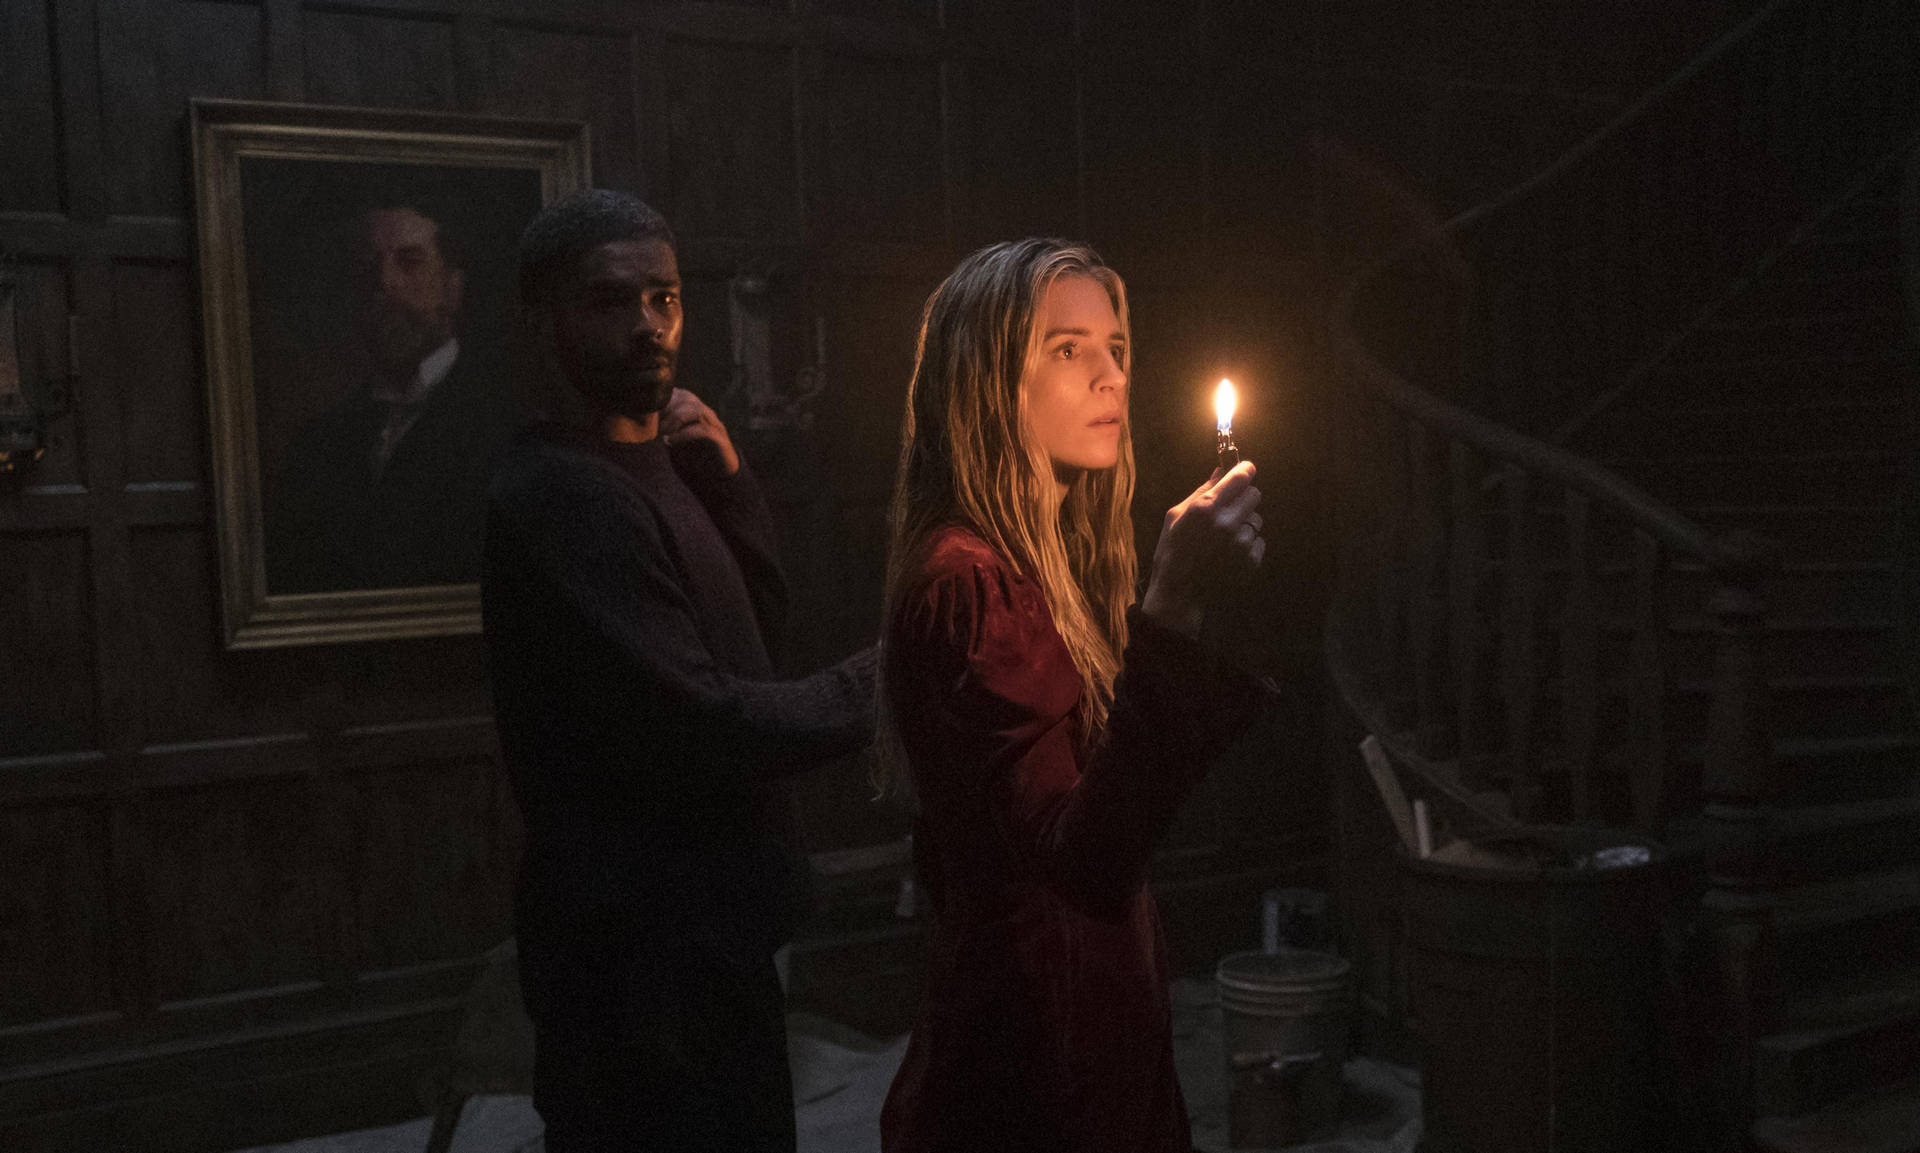 Prairie Holding A Candle In The Oa Series Background